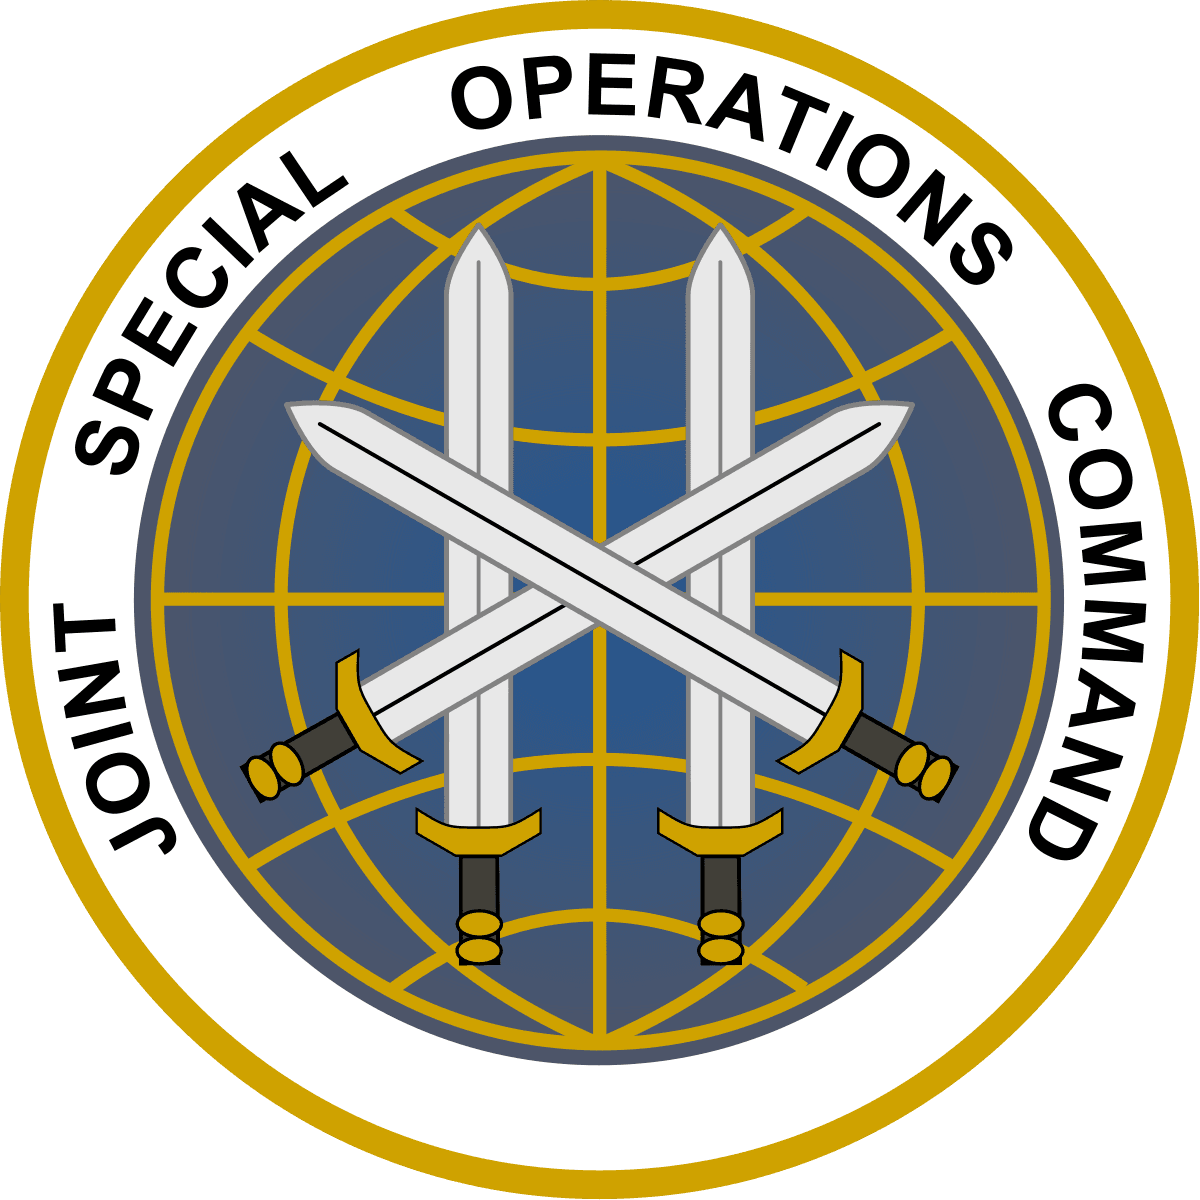 United States Joint Special Operations Command (JSOC)